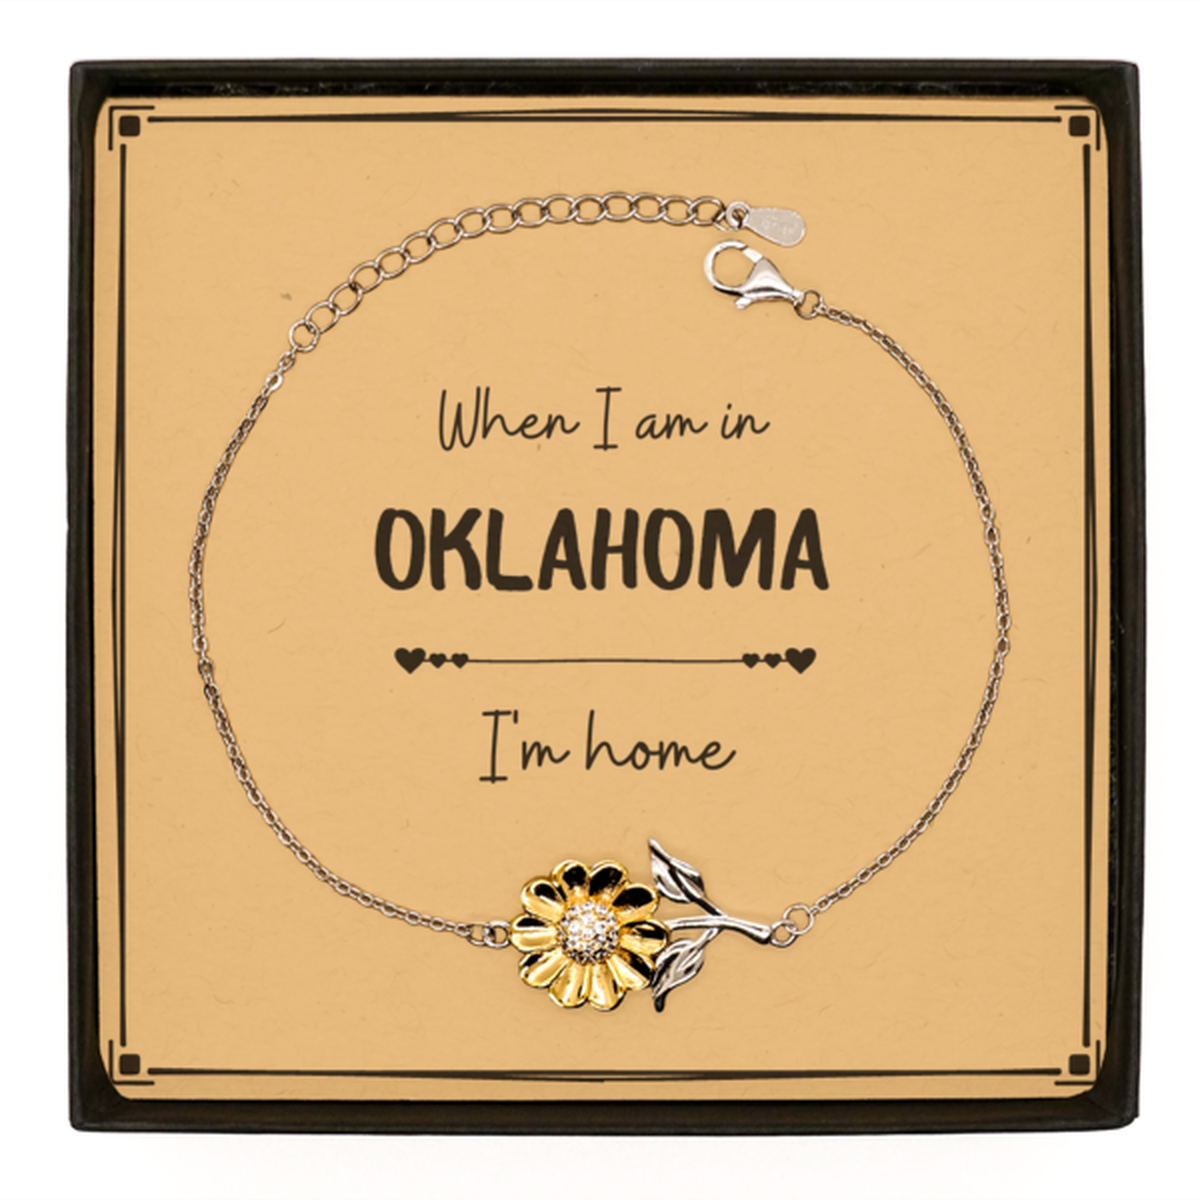 When I am in Oklahoma I'm home Sunflower Bracelet, Message Card Gifts For Oklahoma, State Oklahoma Birthday Gifts for Friends Coworker